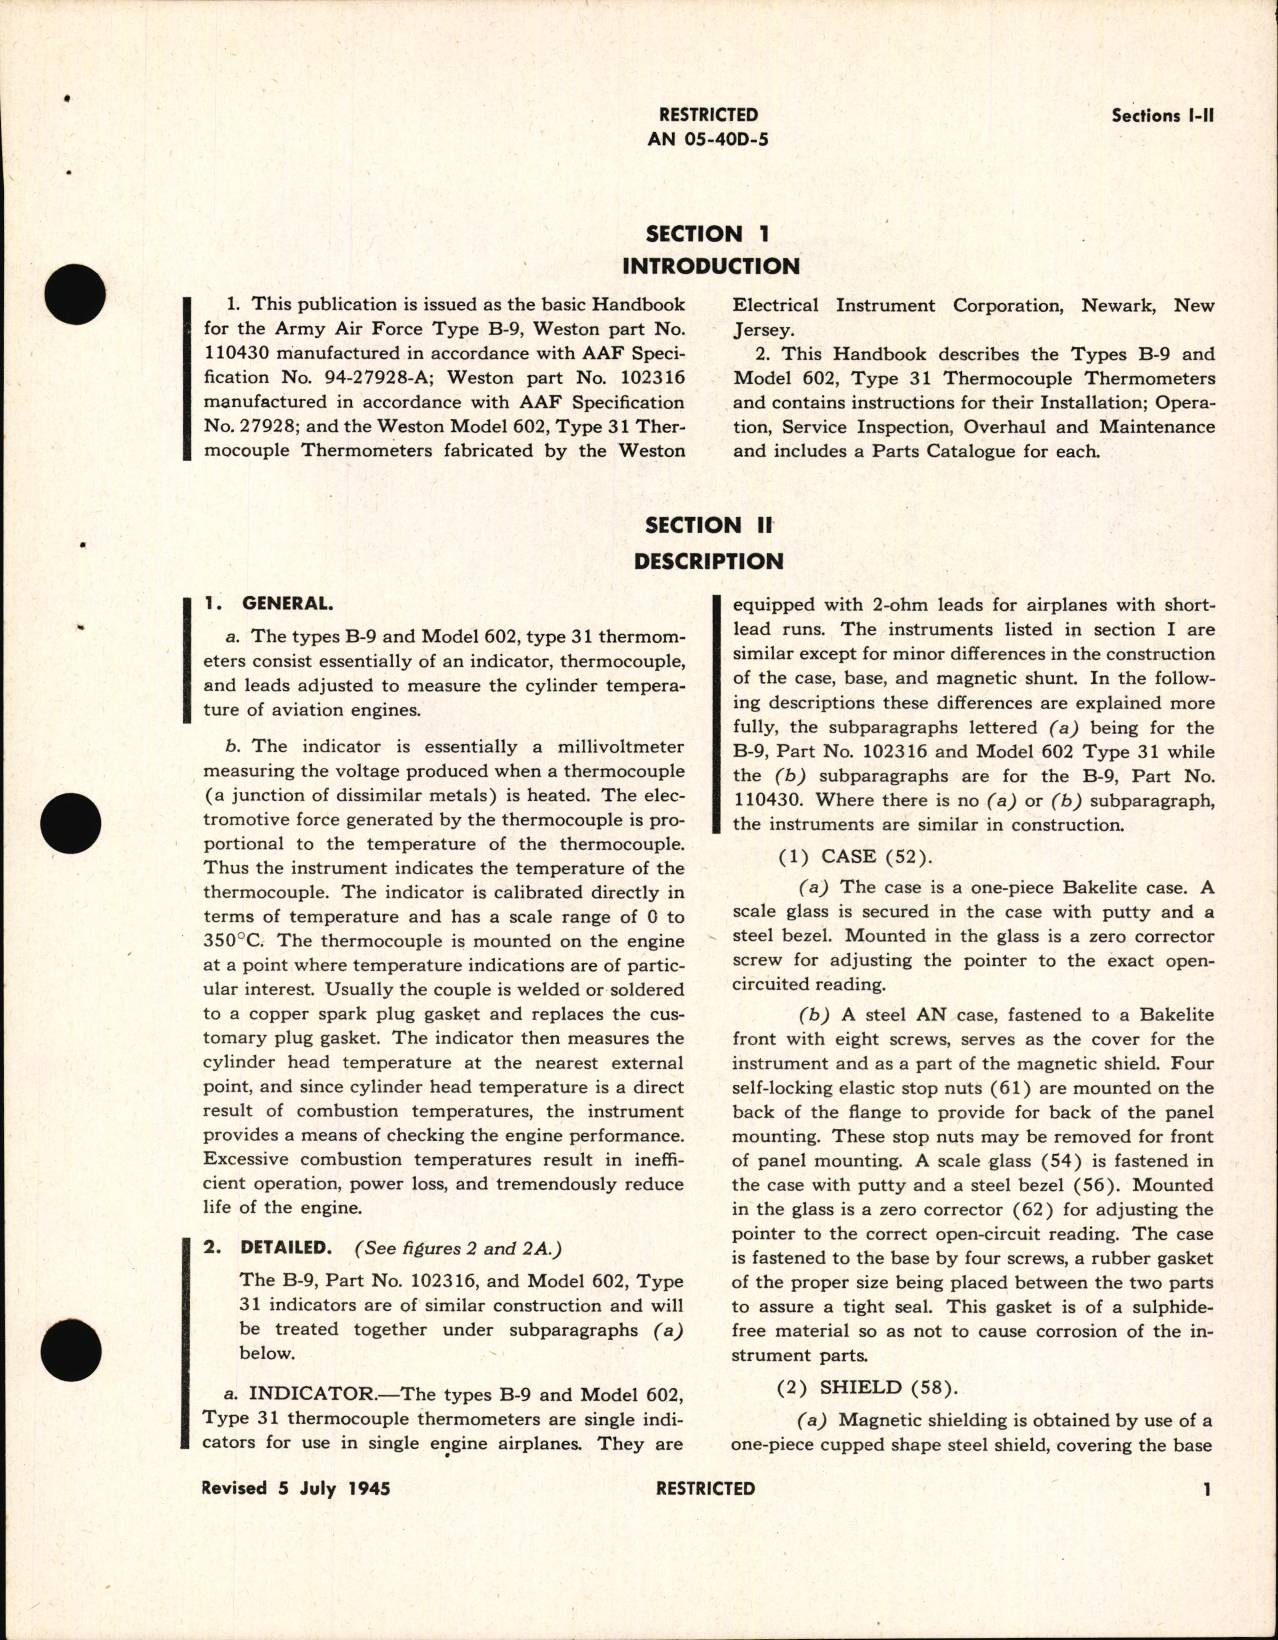 Sample page 7 from AirCorps Library document: Operation, Service, & Overhaul Instructions with Parts Catalog for Thermocouple Thermometers